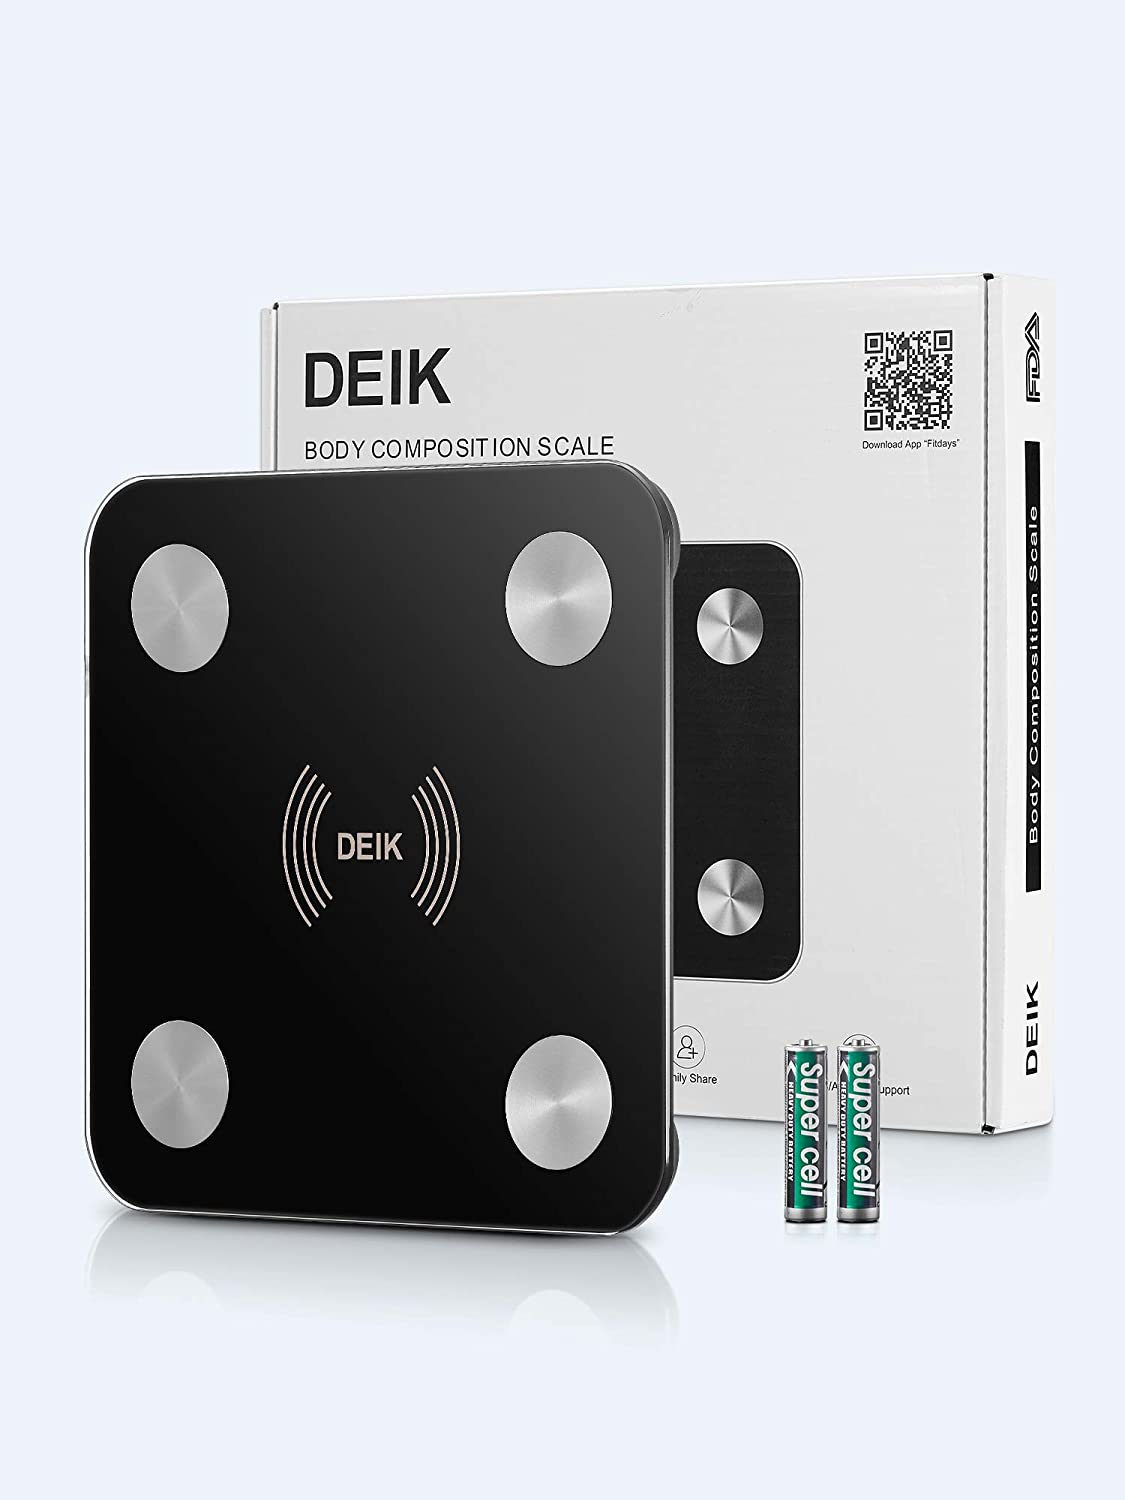 DEIK Smart Digital Body Fat Scale, Black Bluetooth Bathroom Scale, with iOS and Android APP, 180kg/400lb High Precision Measurement, Detects 13 Data including Body Weight, Fat Content, Muscle Mass